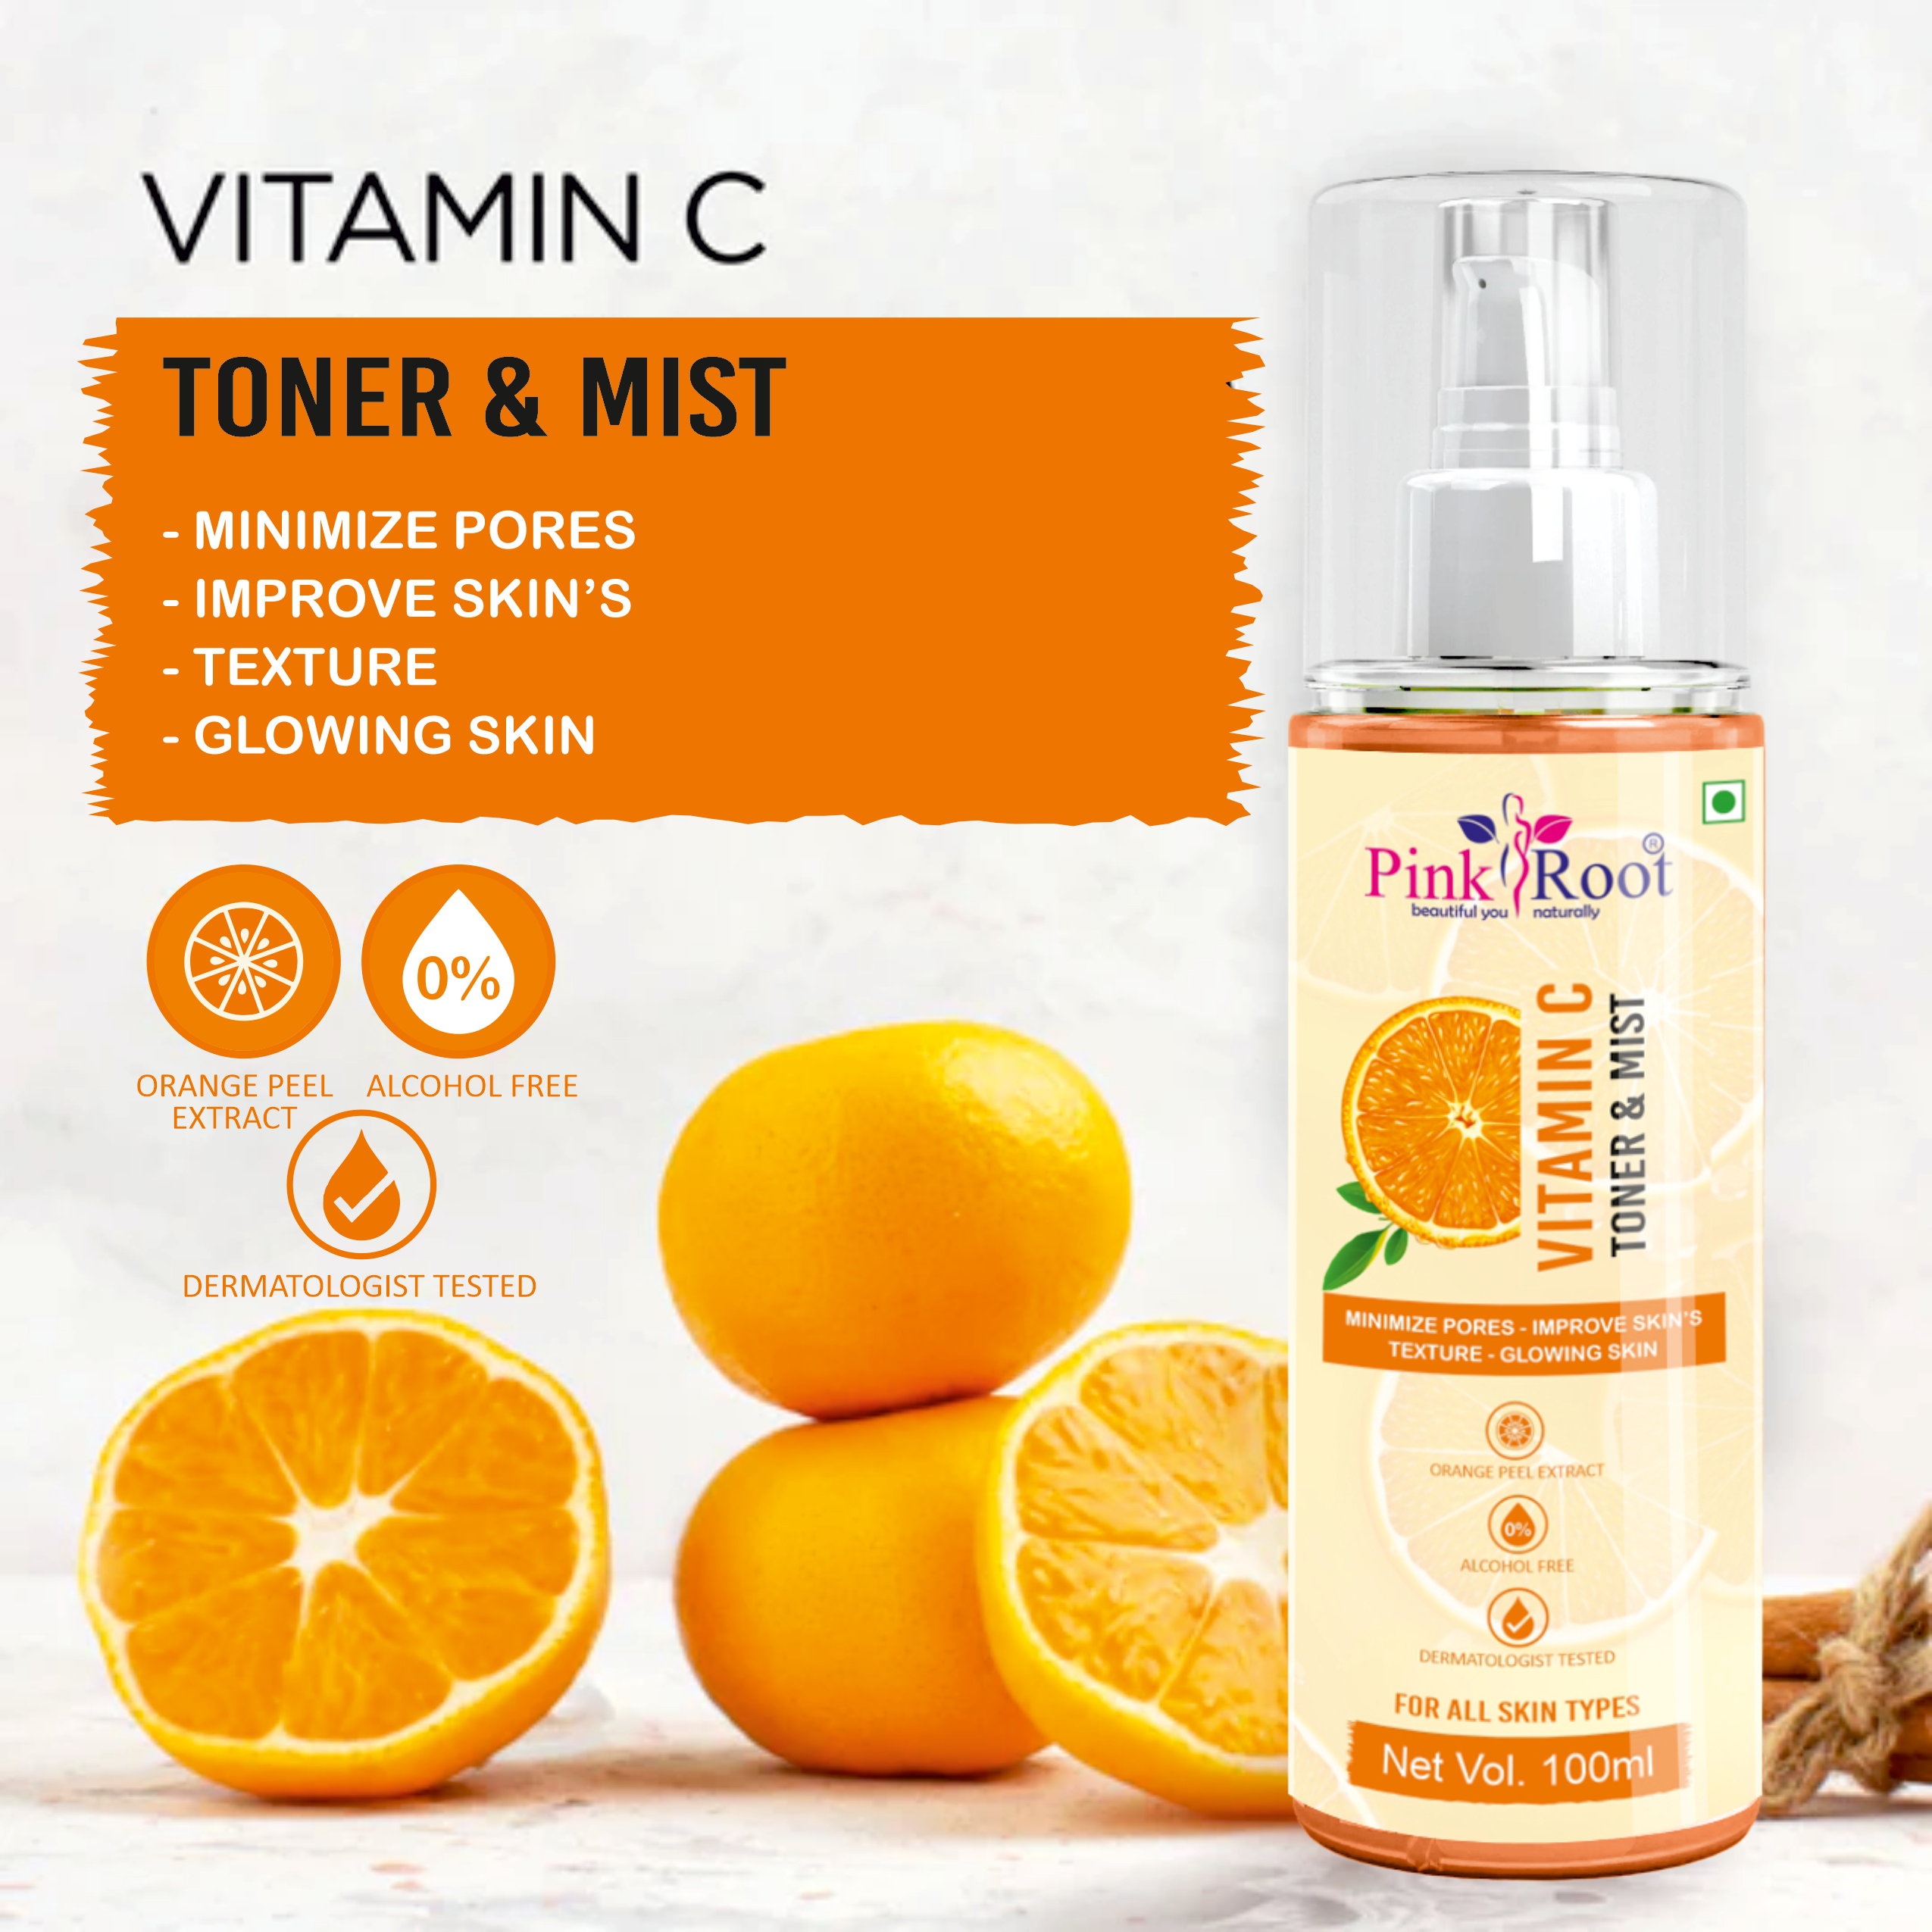 Pink Root Vitamin C Skin Mist Toner with Lemon Essential Oil, Orange Essential Oil & Aloe Vera Extracts - For All Skin Types - No Parabens, Silicones, Mineral Oil & Sulphates - 100ml (Pack of 2)